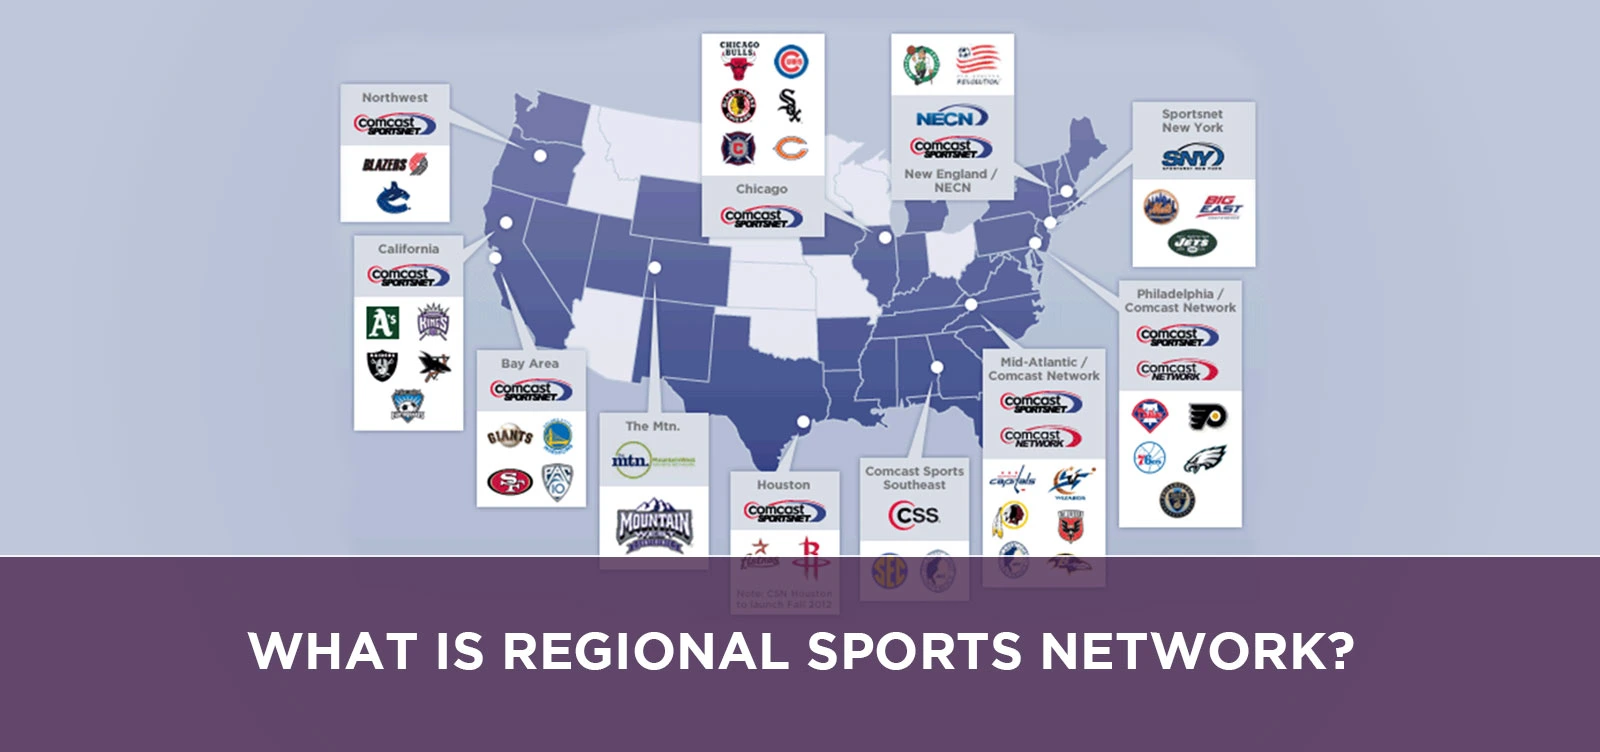 What is Regional Sports Network?